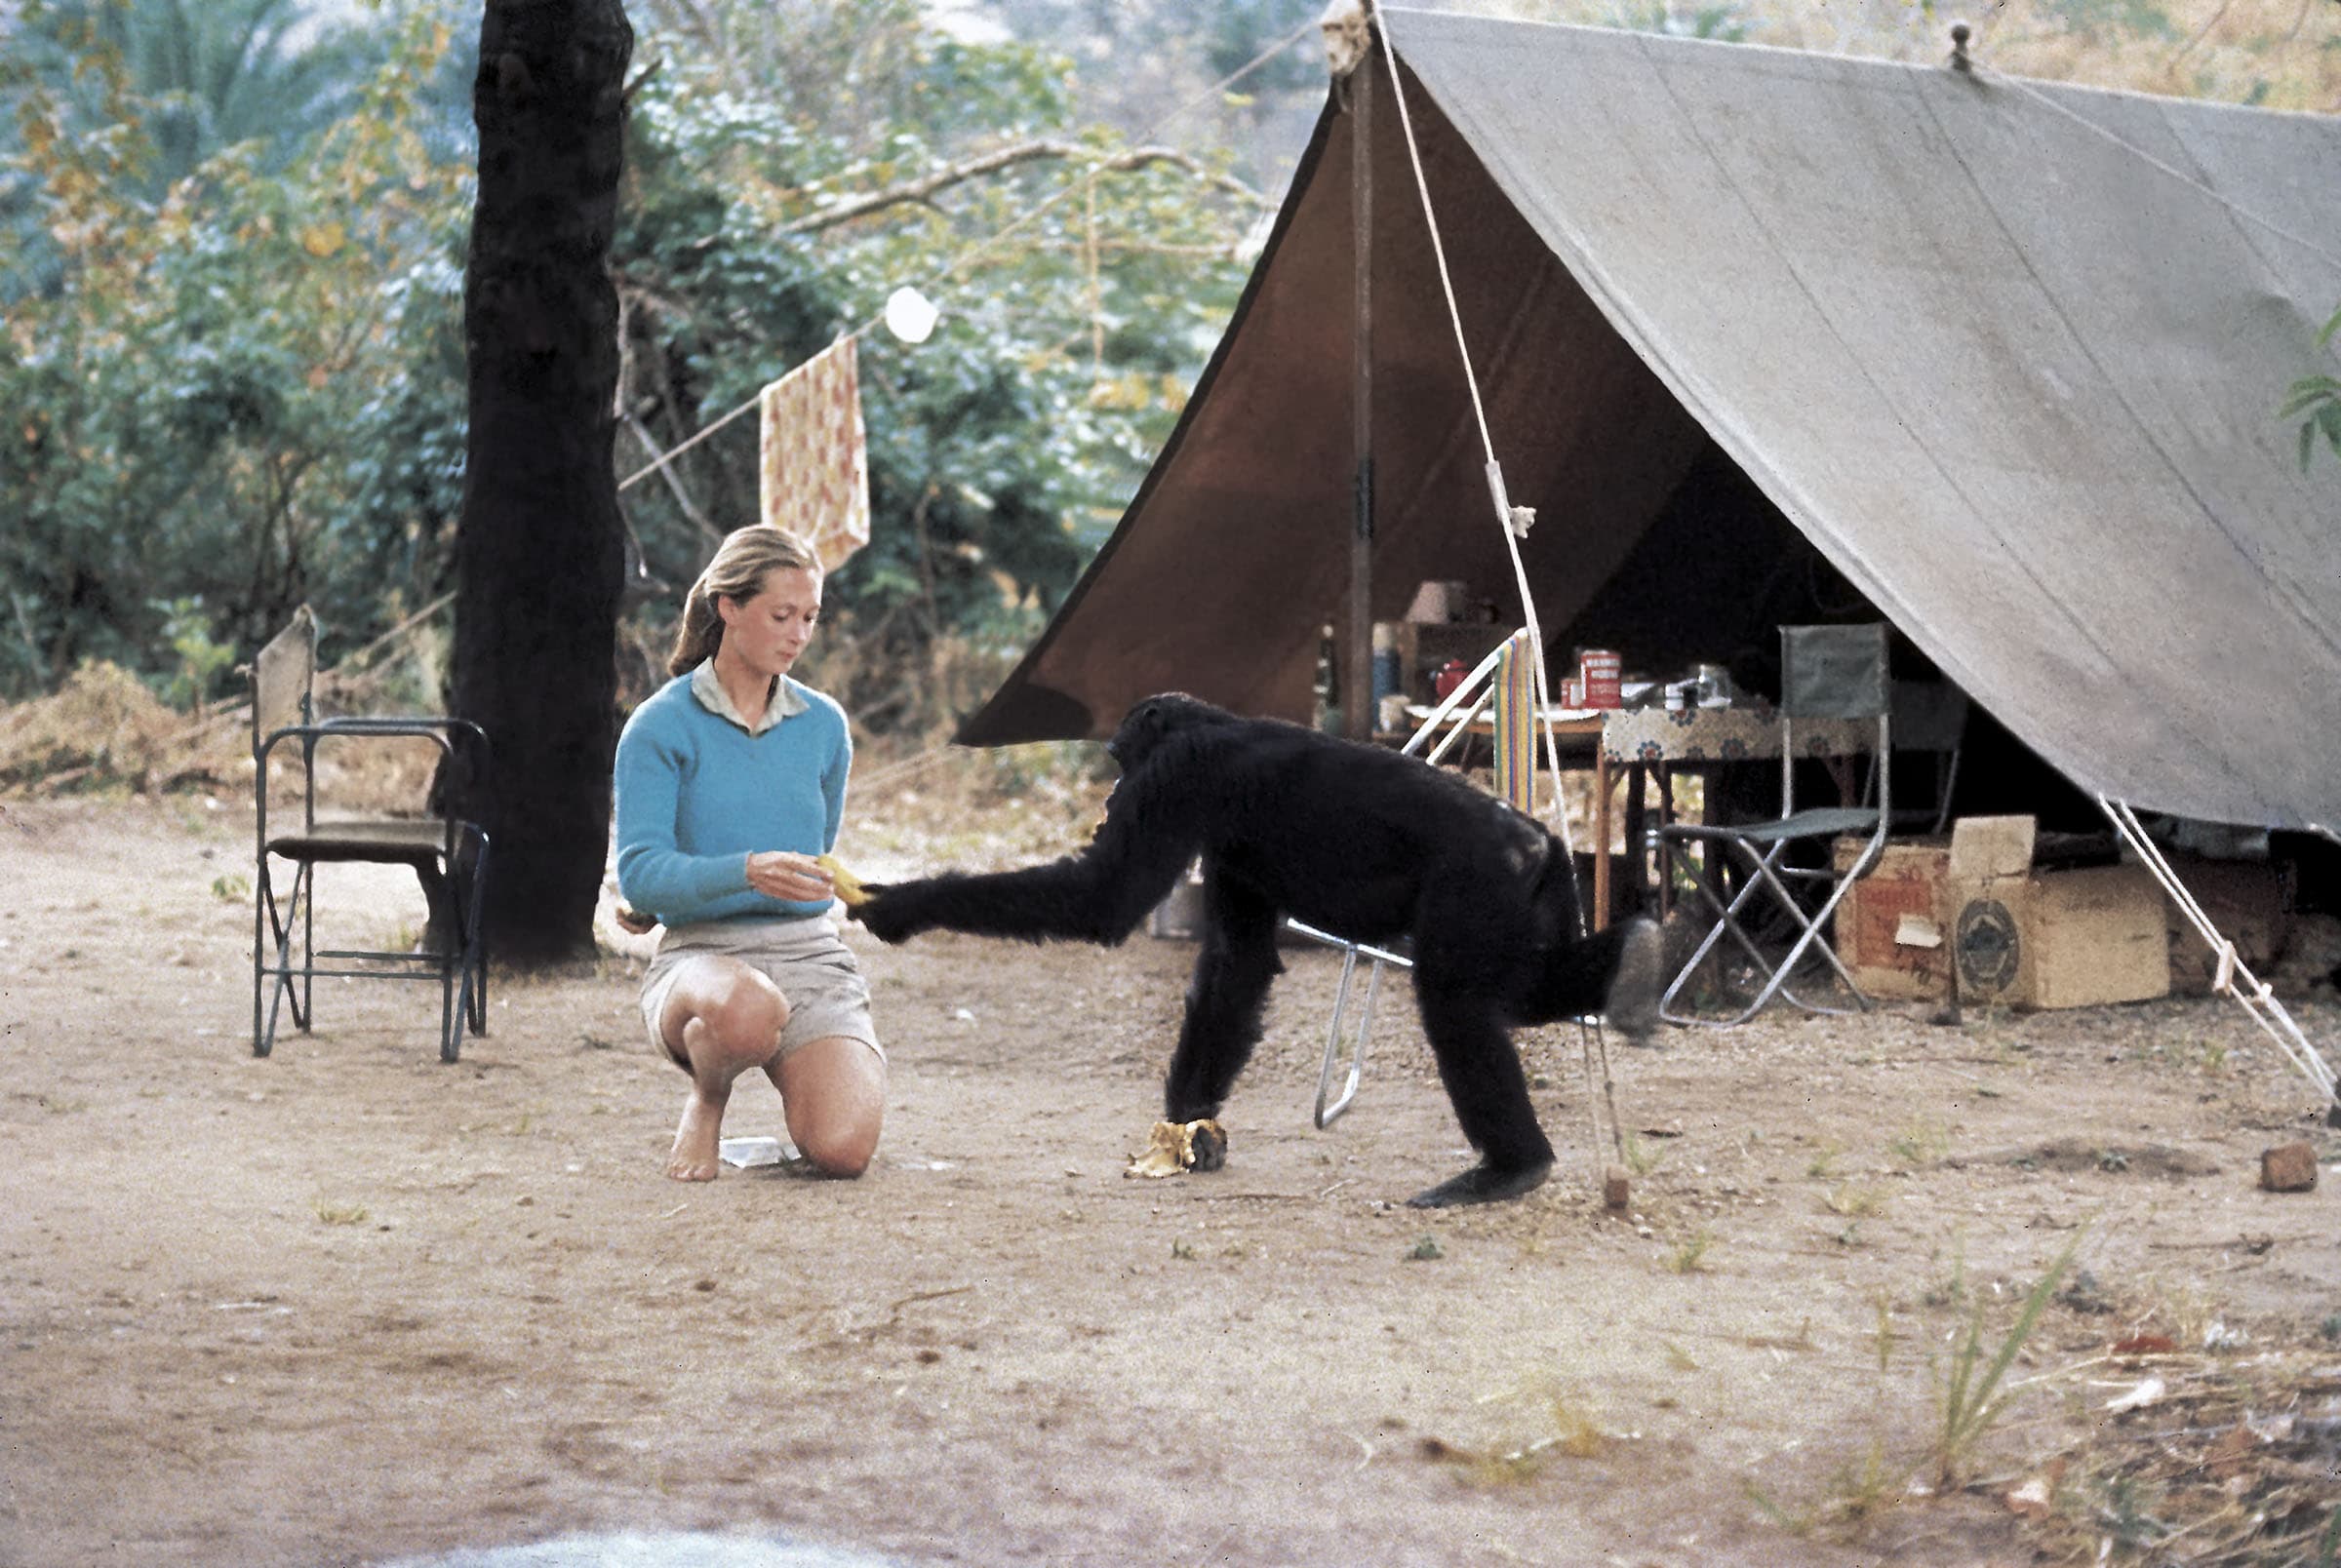 Young researcher Jane Goodall with David Greybeard, the first chimpanzee to lose his fear of her when she began her studies in Gombe Stream Chimpanzee Reserve in Tanganyika. (© The Jane Goodall Institute)